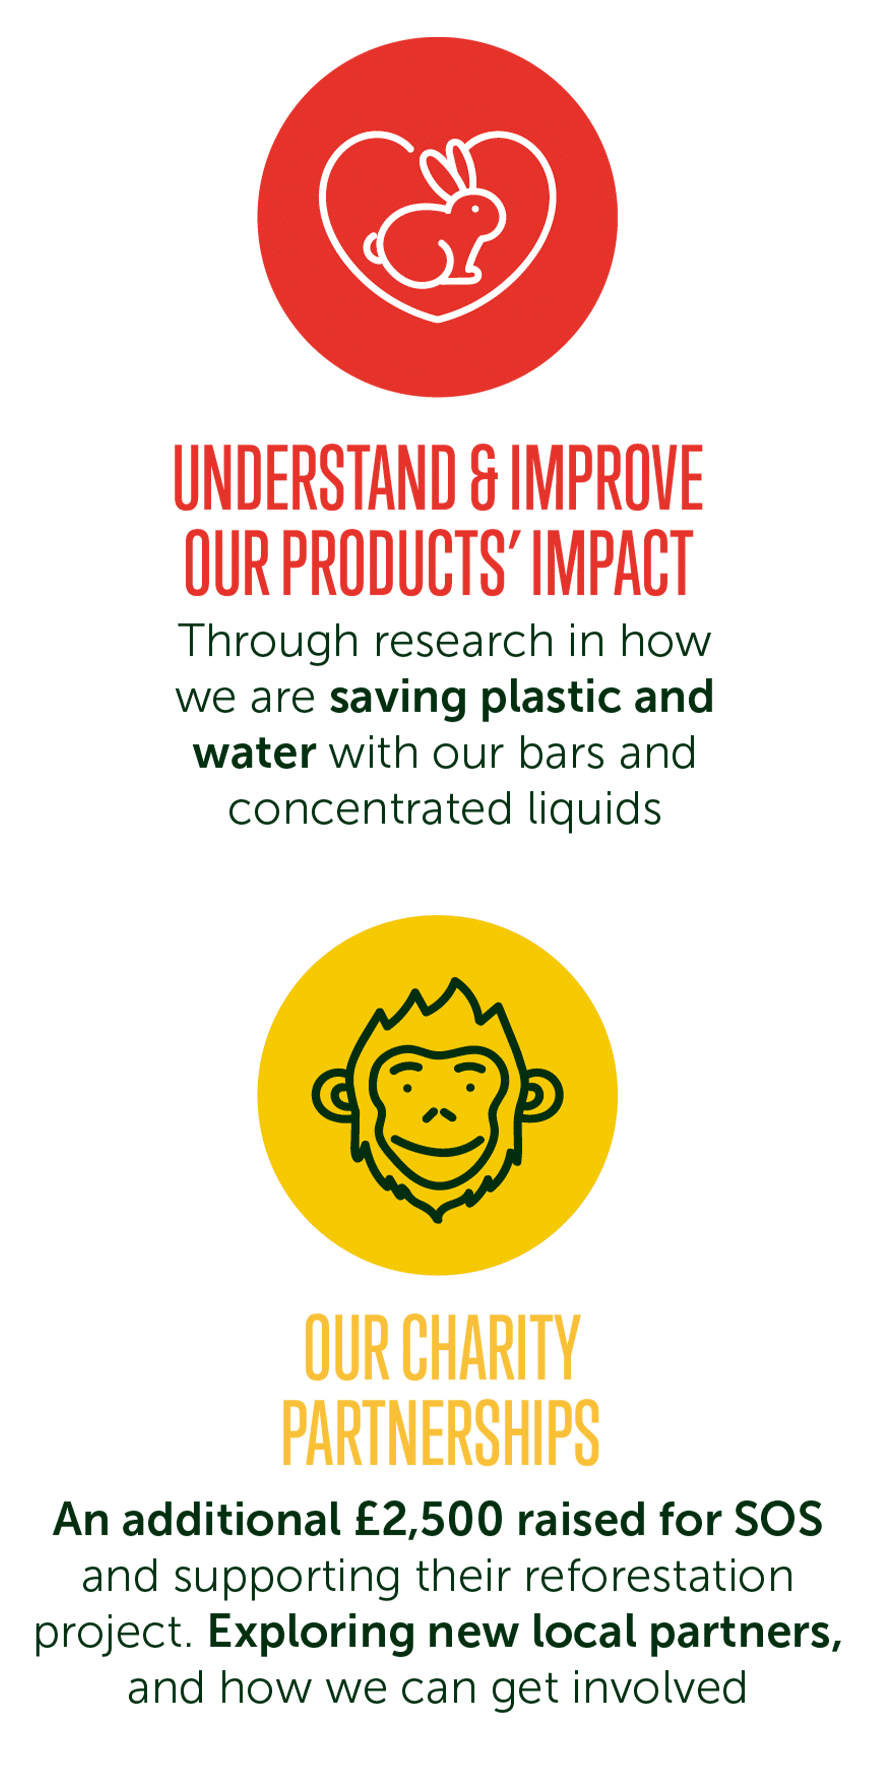 Icon with title of "Understand & improve our products' impact" with sub-points including "Through research in how we are saving plastic and water with our bars and concentrated liquids" and another icon with title "Our Charity Partnerships" with sub-points including "An additional £2,500 raised for SOS and supporting their reforestation project. Exploring new local partners and how we can get involved."."